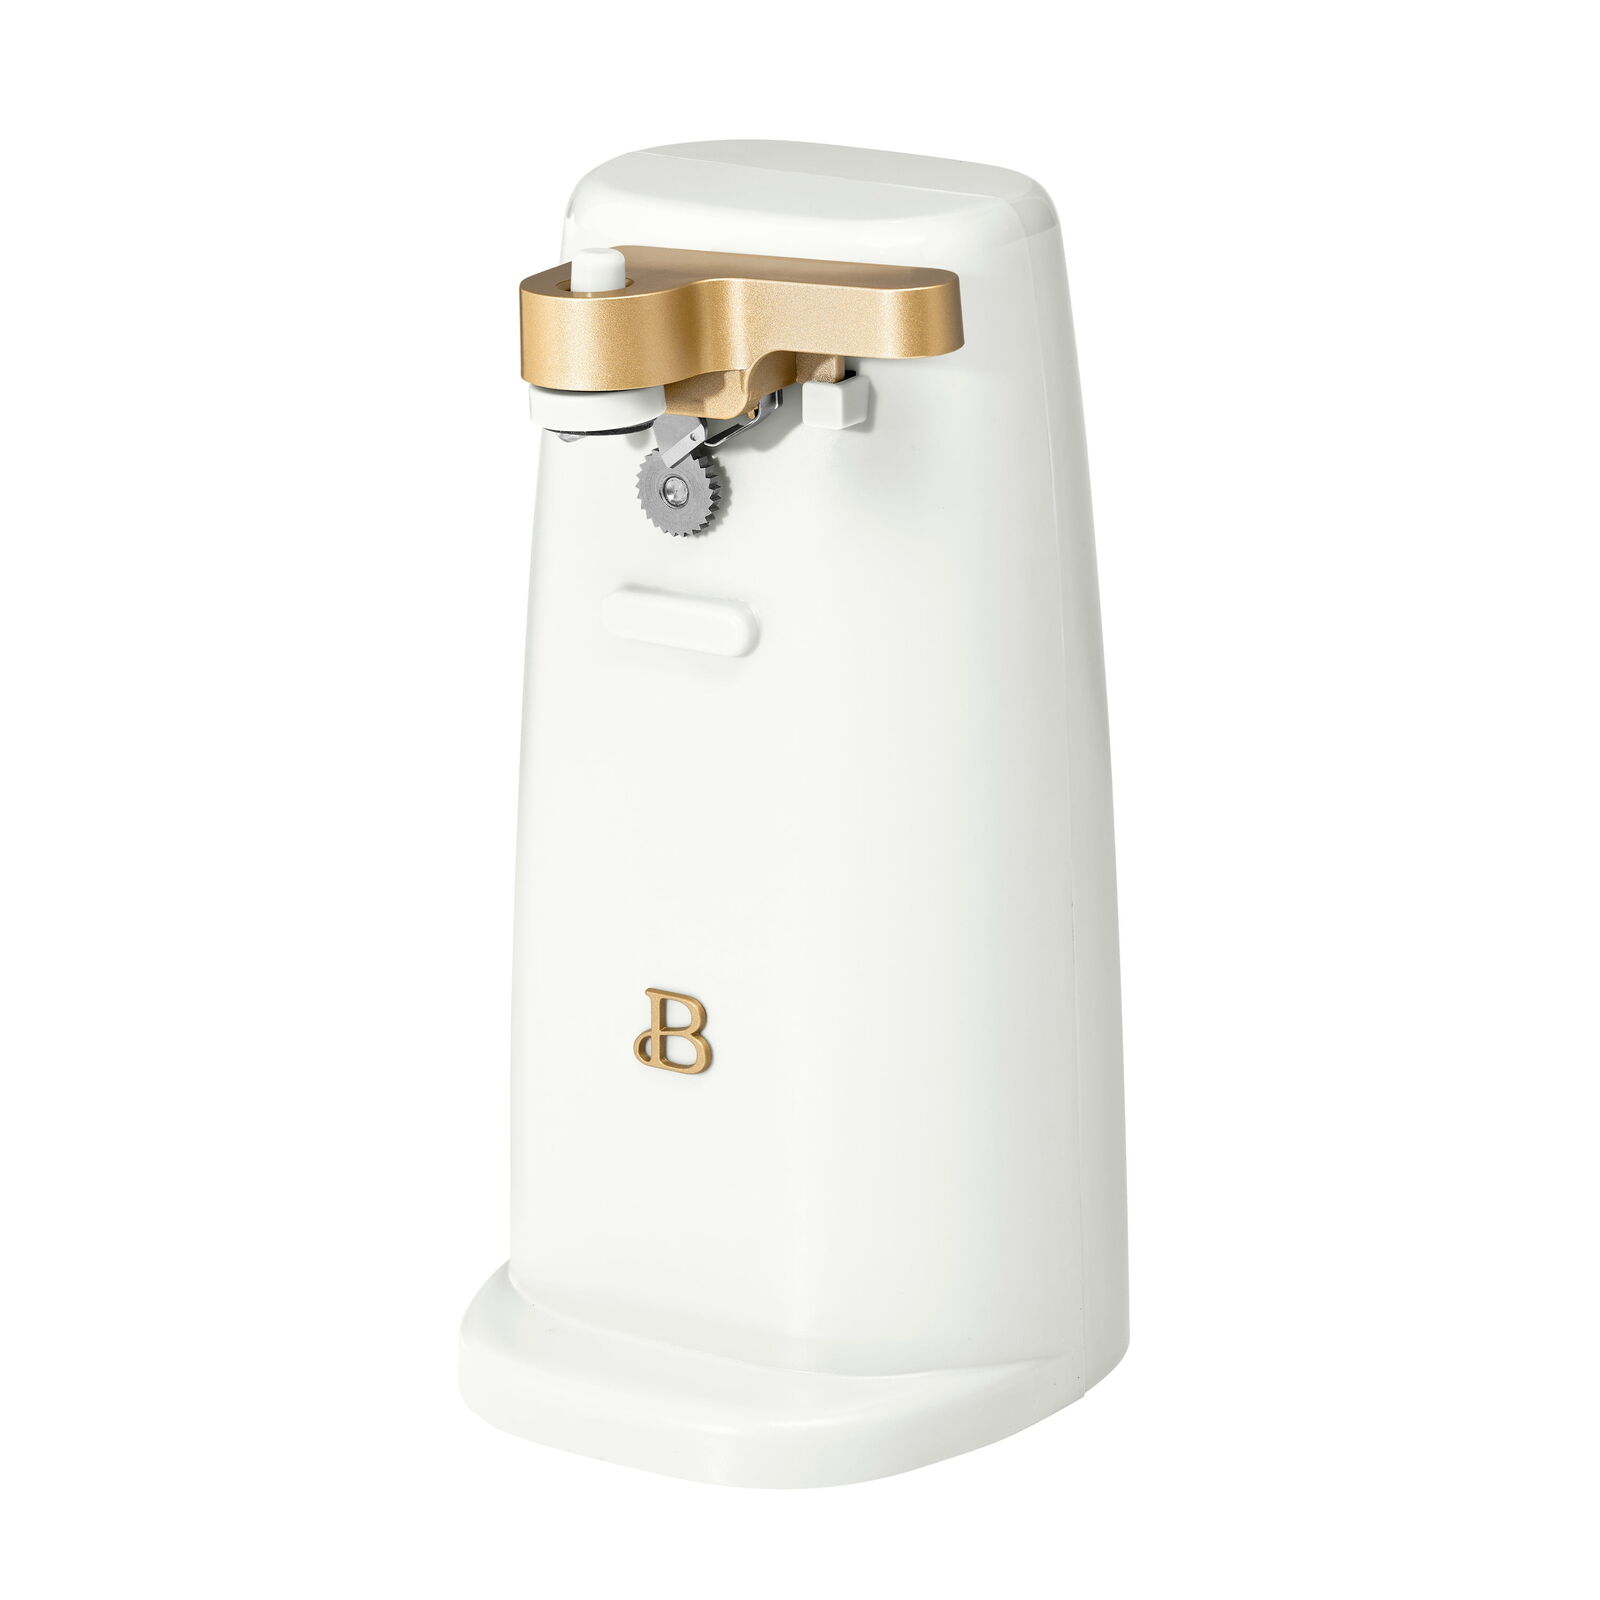 Easy-Prep Electric Can Opener, White Icing by Drew Barrymore